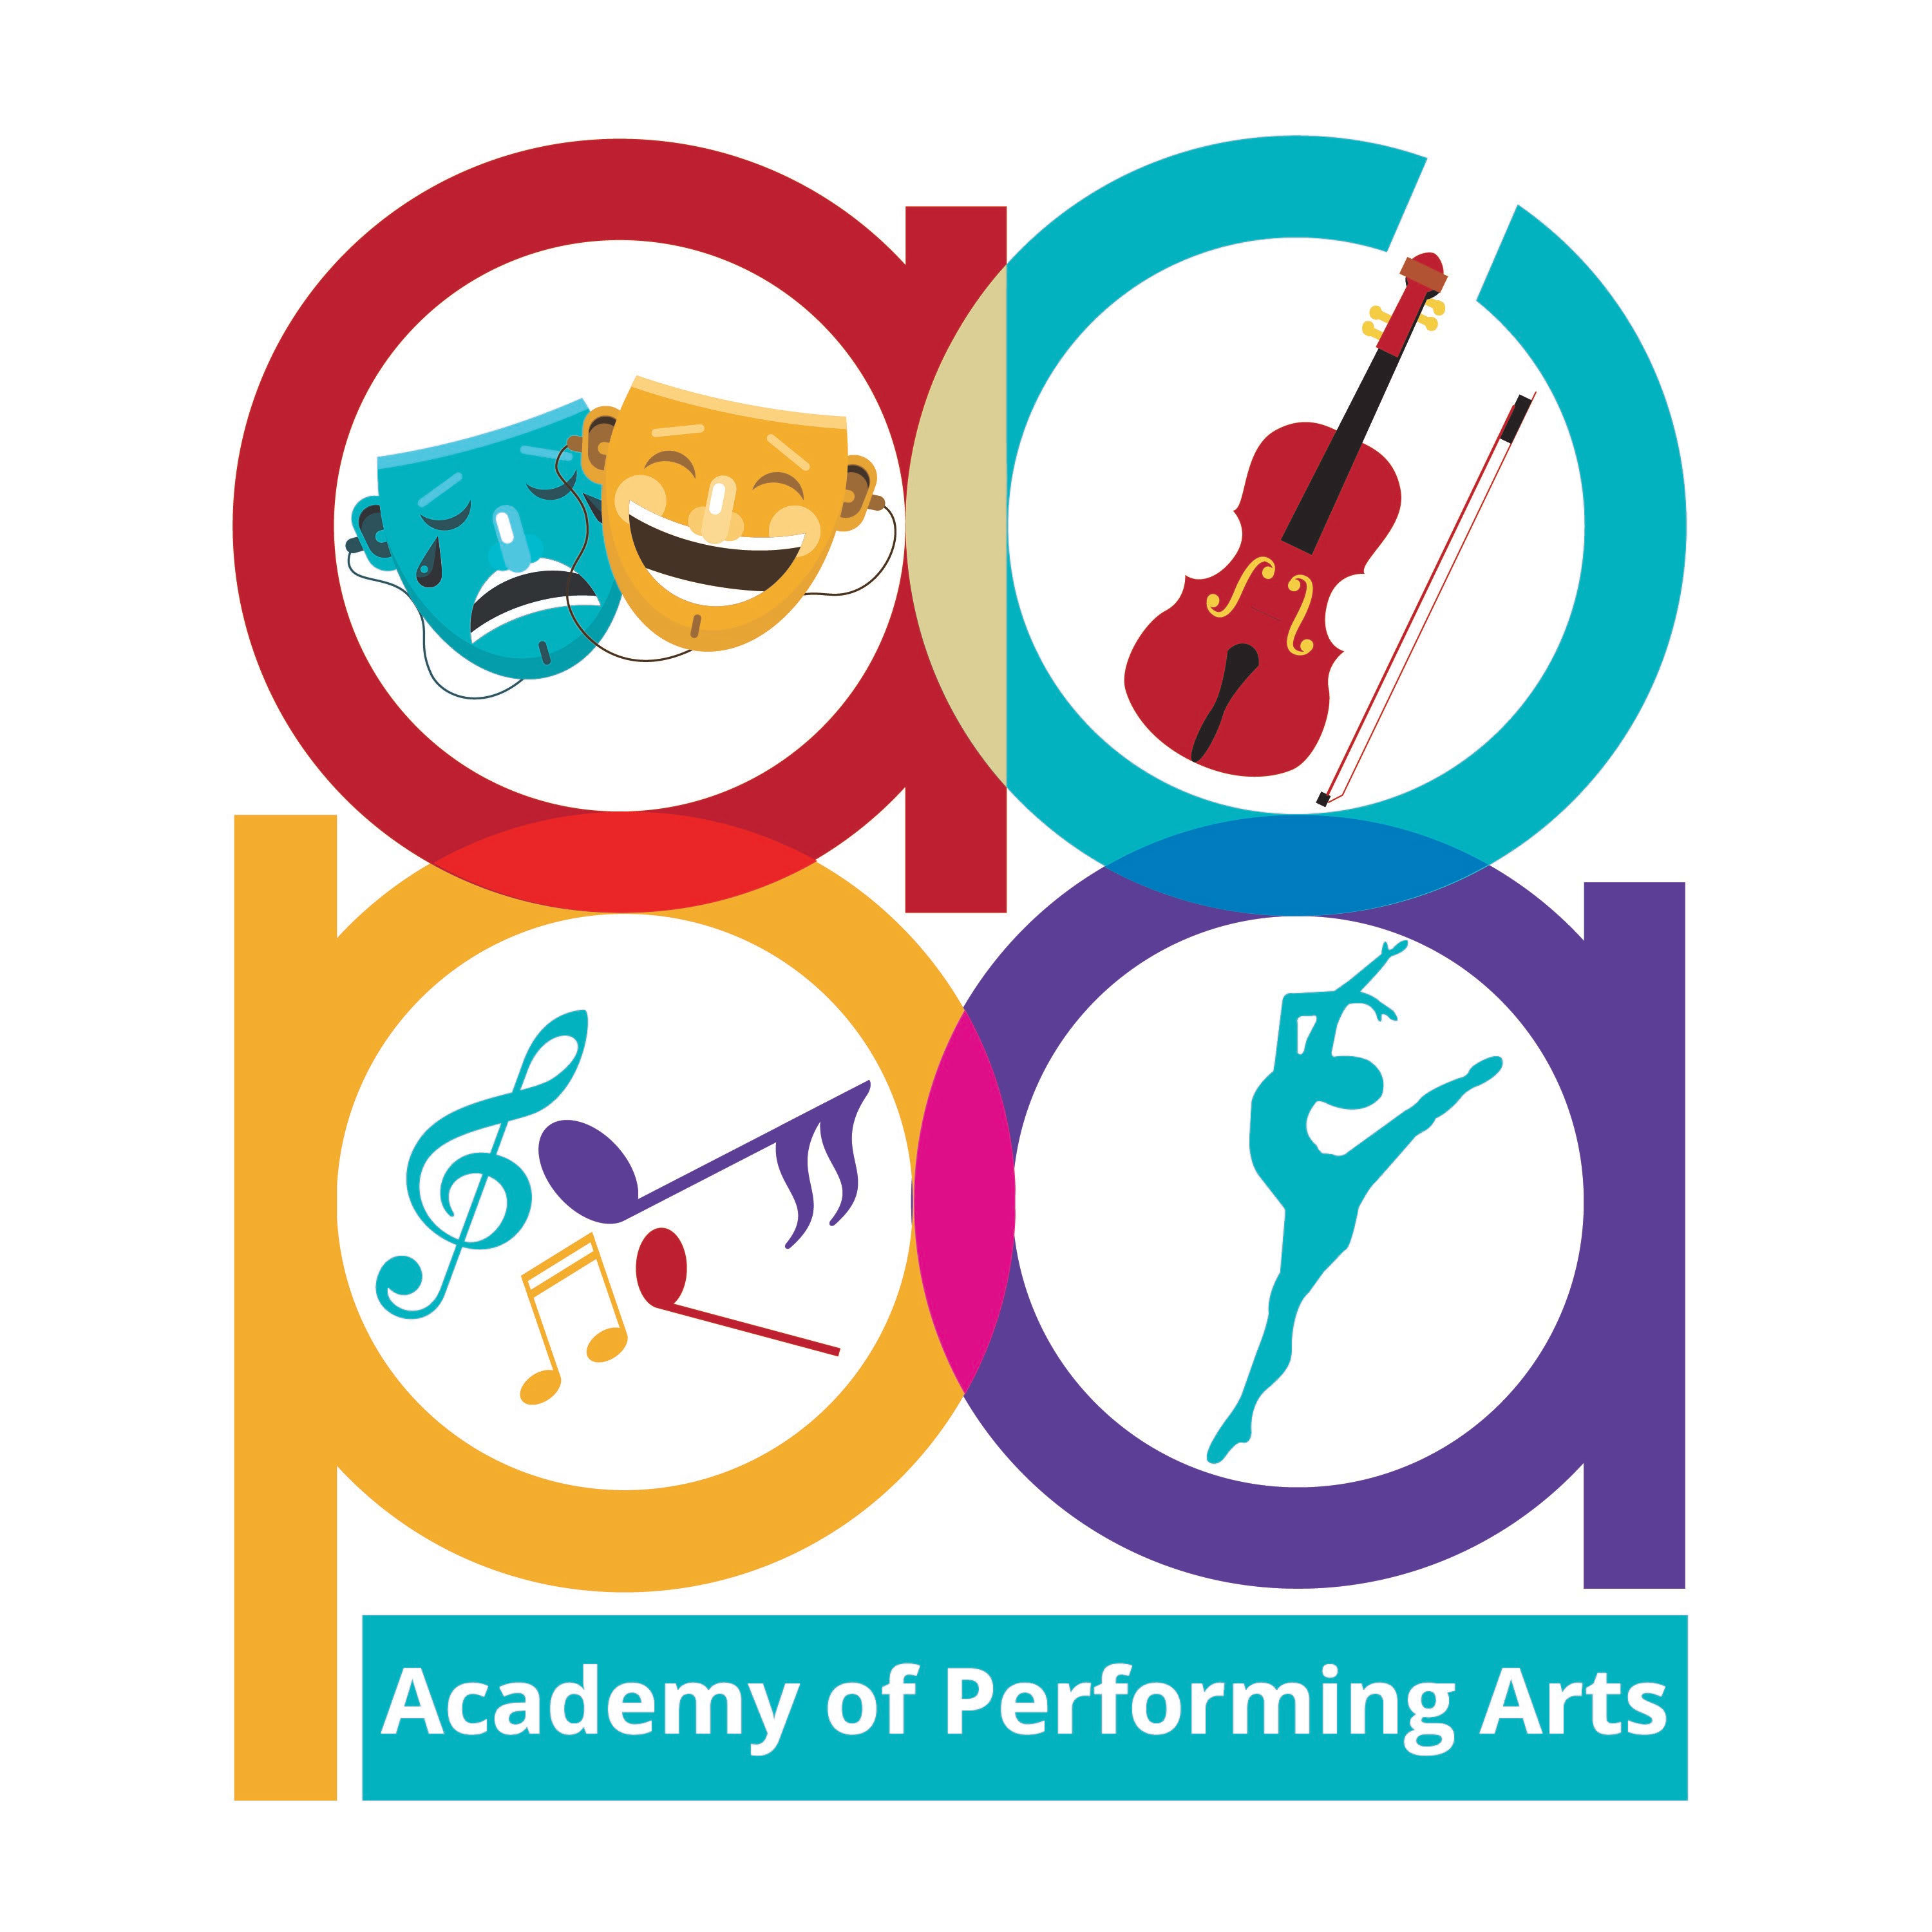 ACADEMY OF PERFORMING ARTS